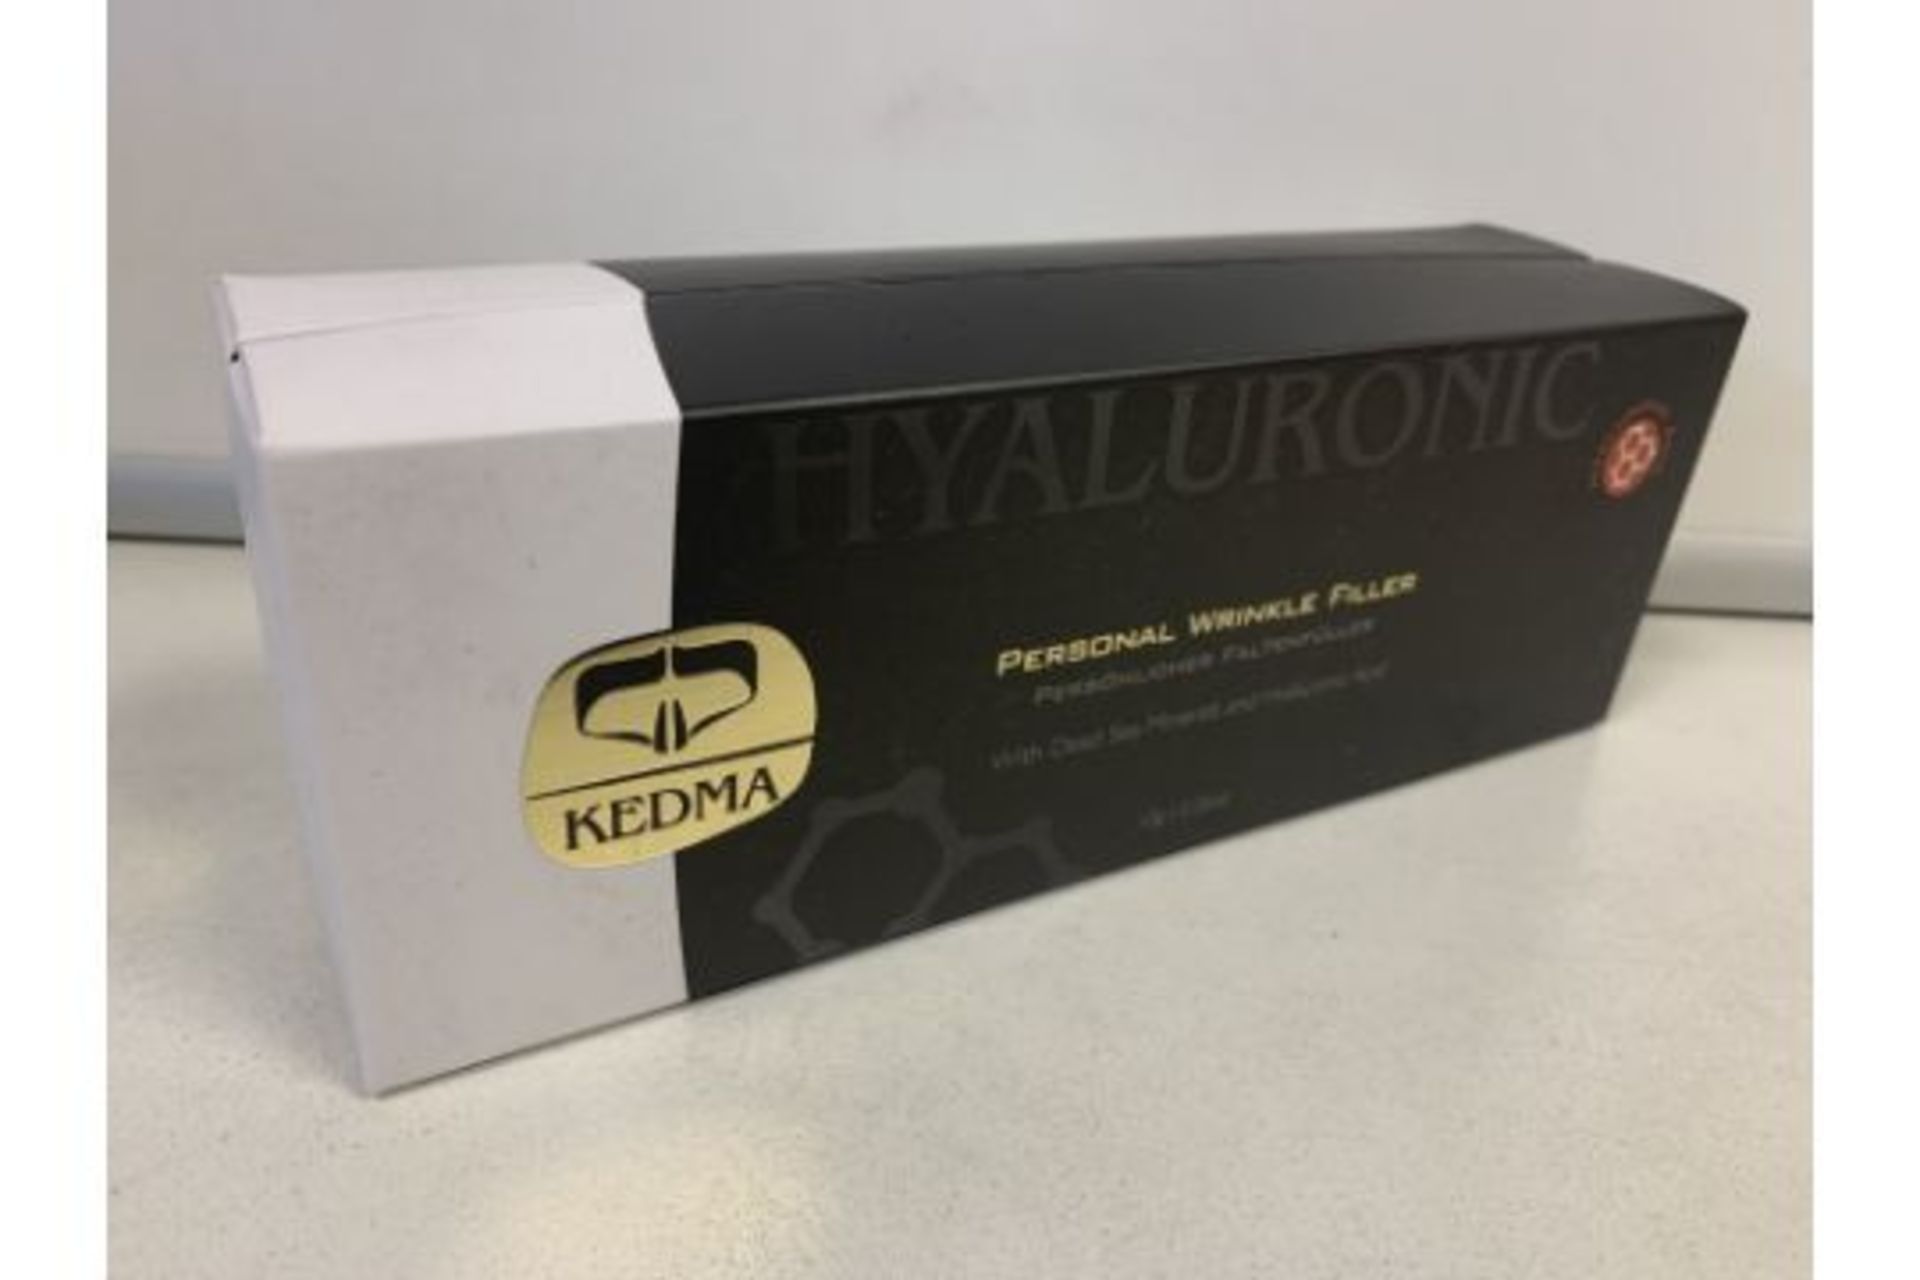 KEDMA PERSONAL WRINKLE FILLER KIT WITH DEAD SEA MINERALS AND HYALURONIC ACID